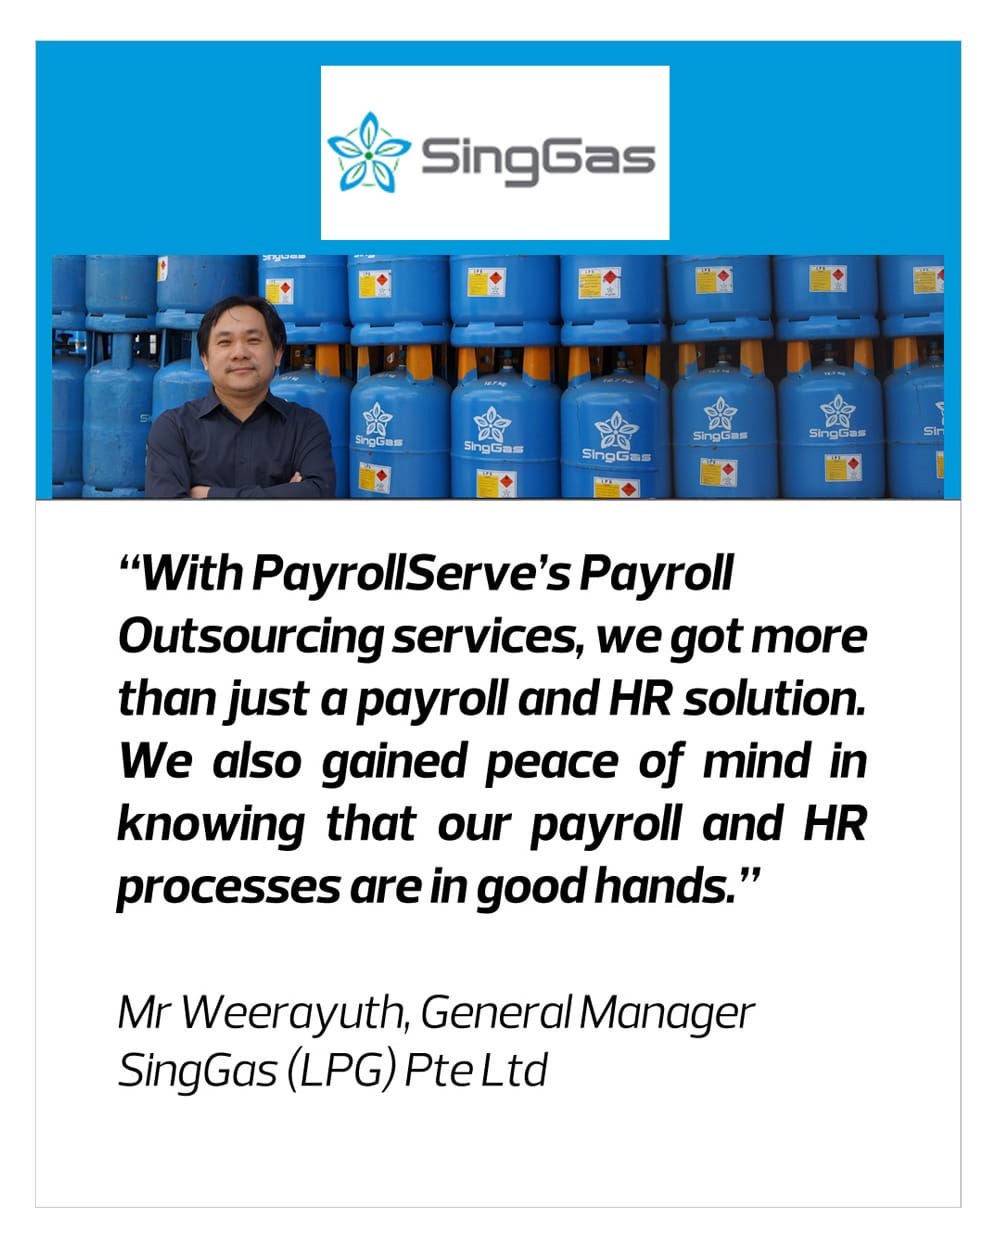 With PayrollServe, we got more than just a payroll and HR Solution. We also gained peace of mind in knowing that our payroll and HR processes are in good hands- SingGas